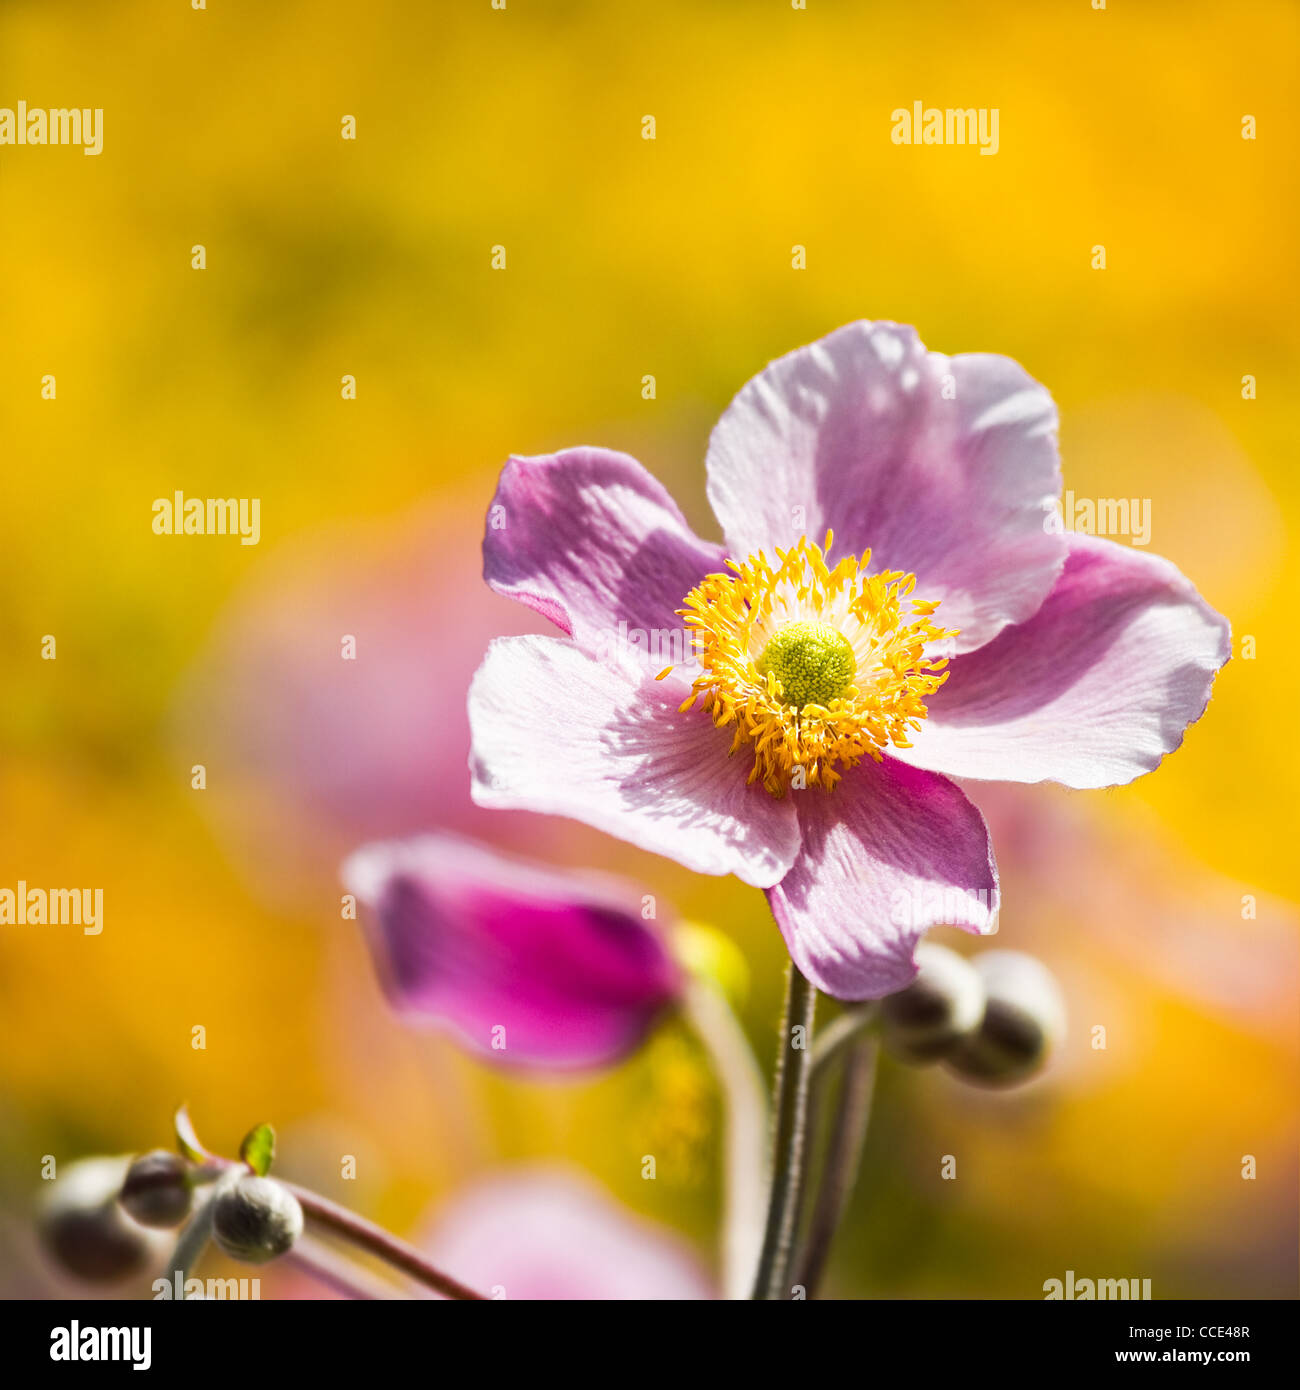 Pink Japanese Anemone or Anemone japonica flower blooming in summer with background of yellow flowers - square image. Stock Photo